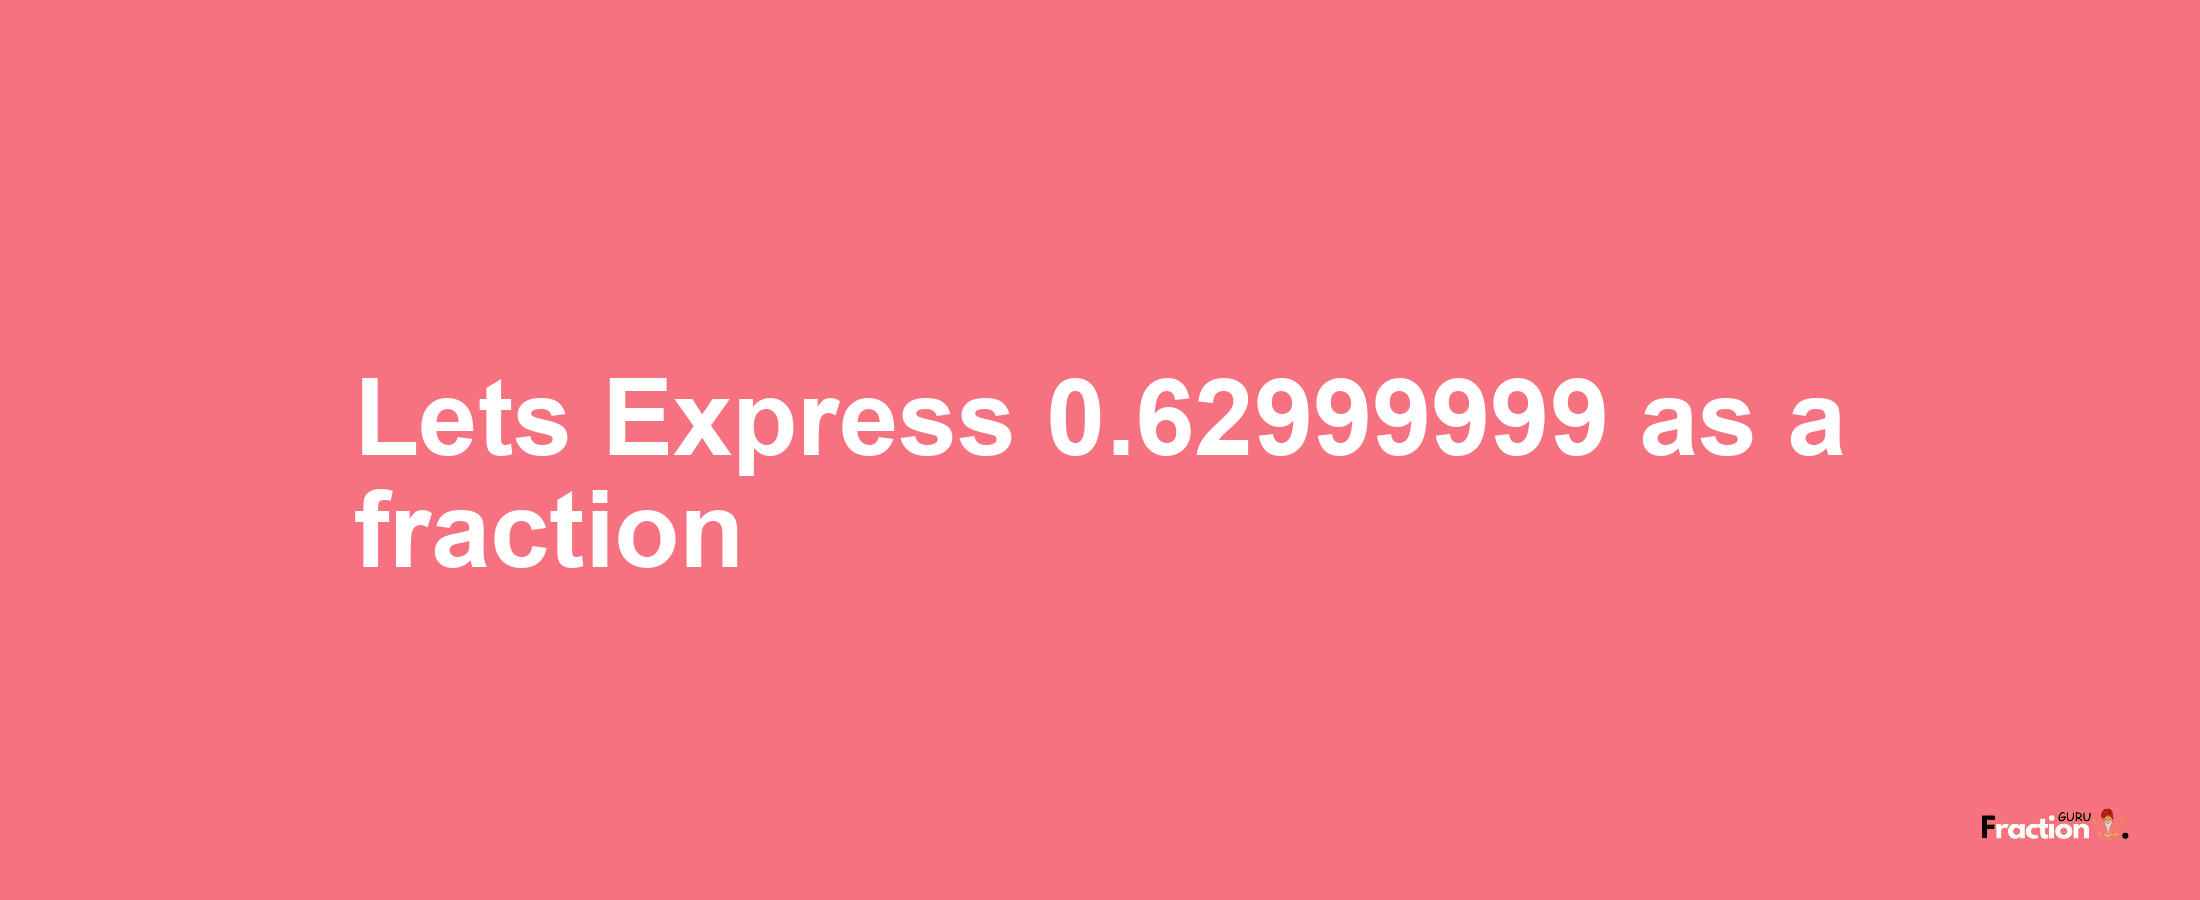 Lets Express 0.62999999 as afraction